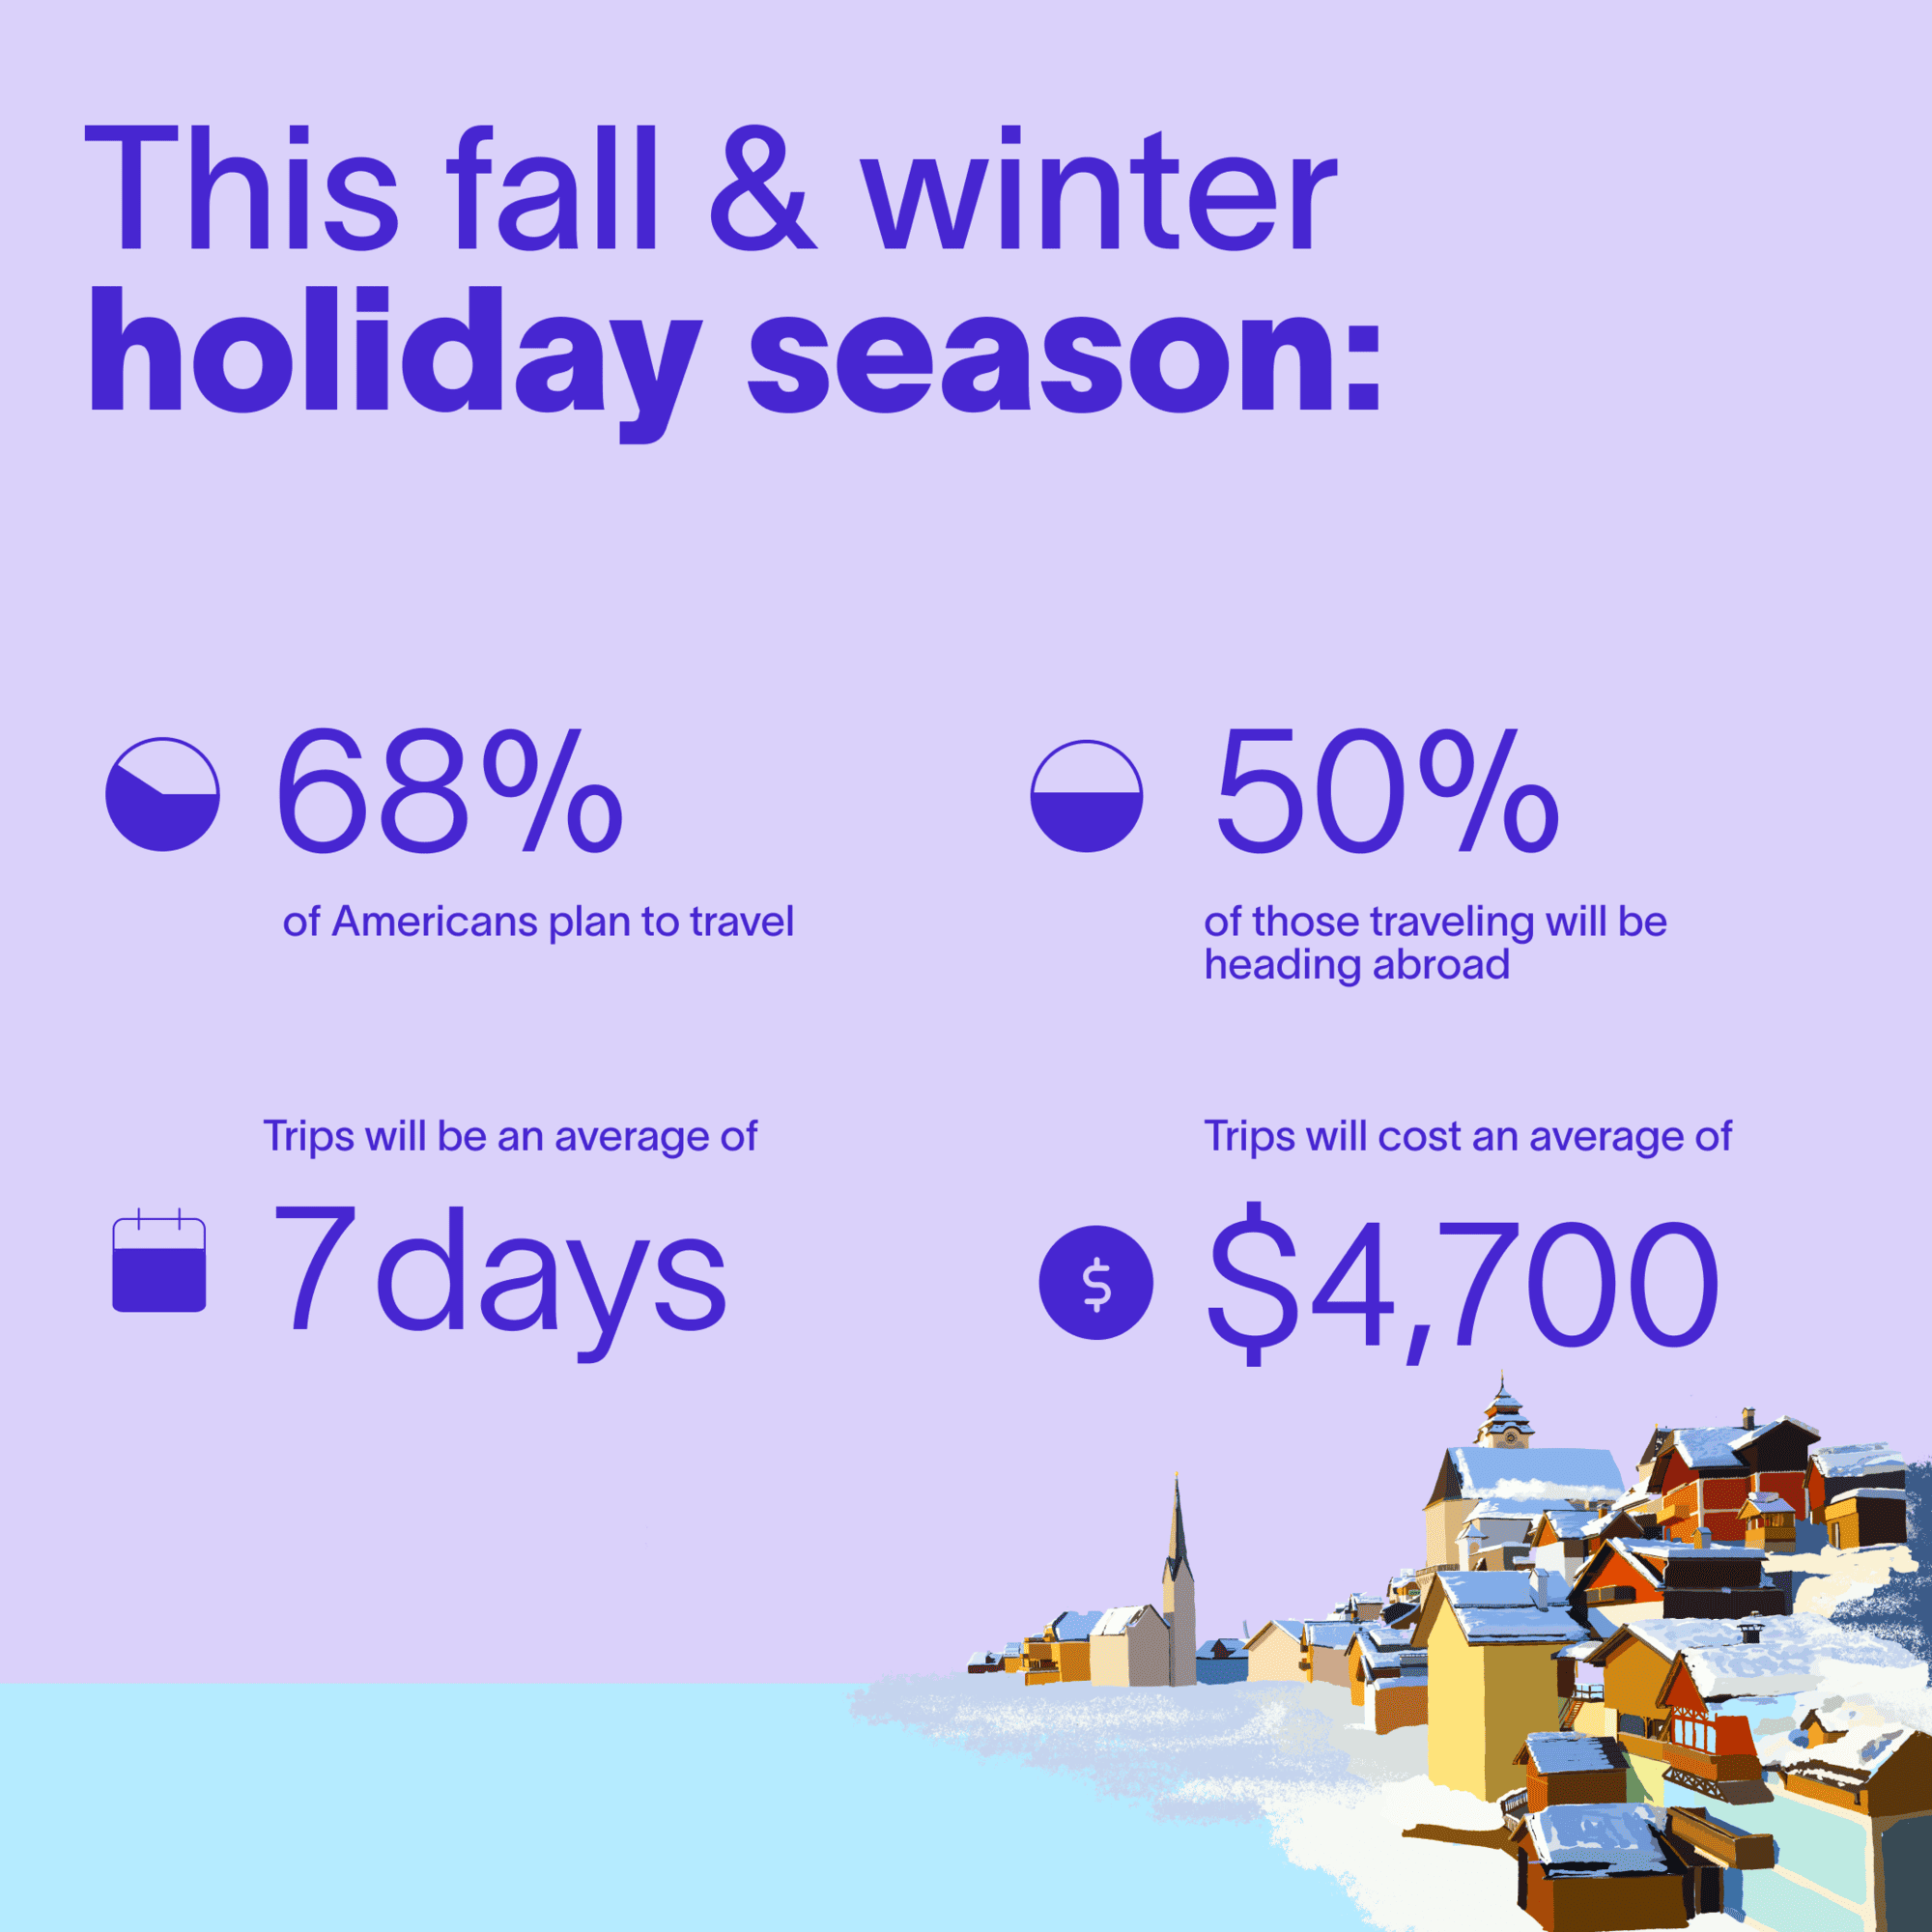 An infographic showing how many people plan to travel this holiday season, how long they plan to go for, and the average amount it will cost.